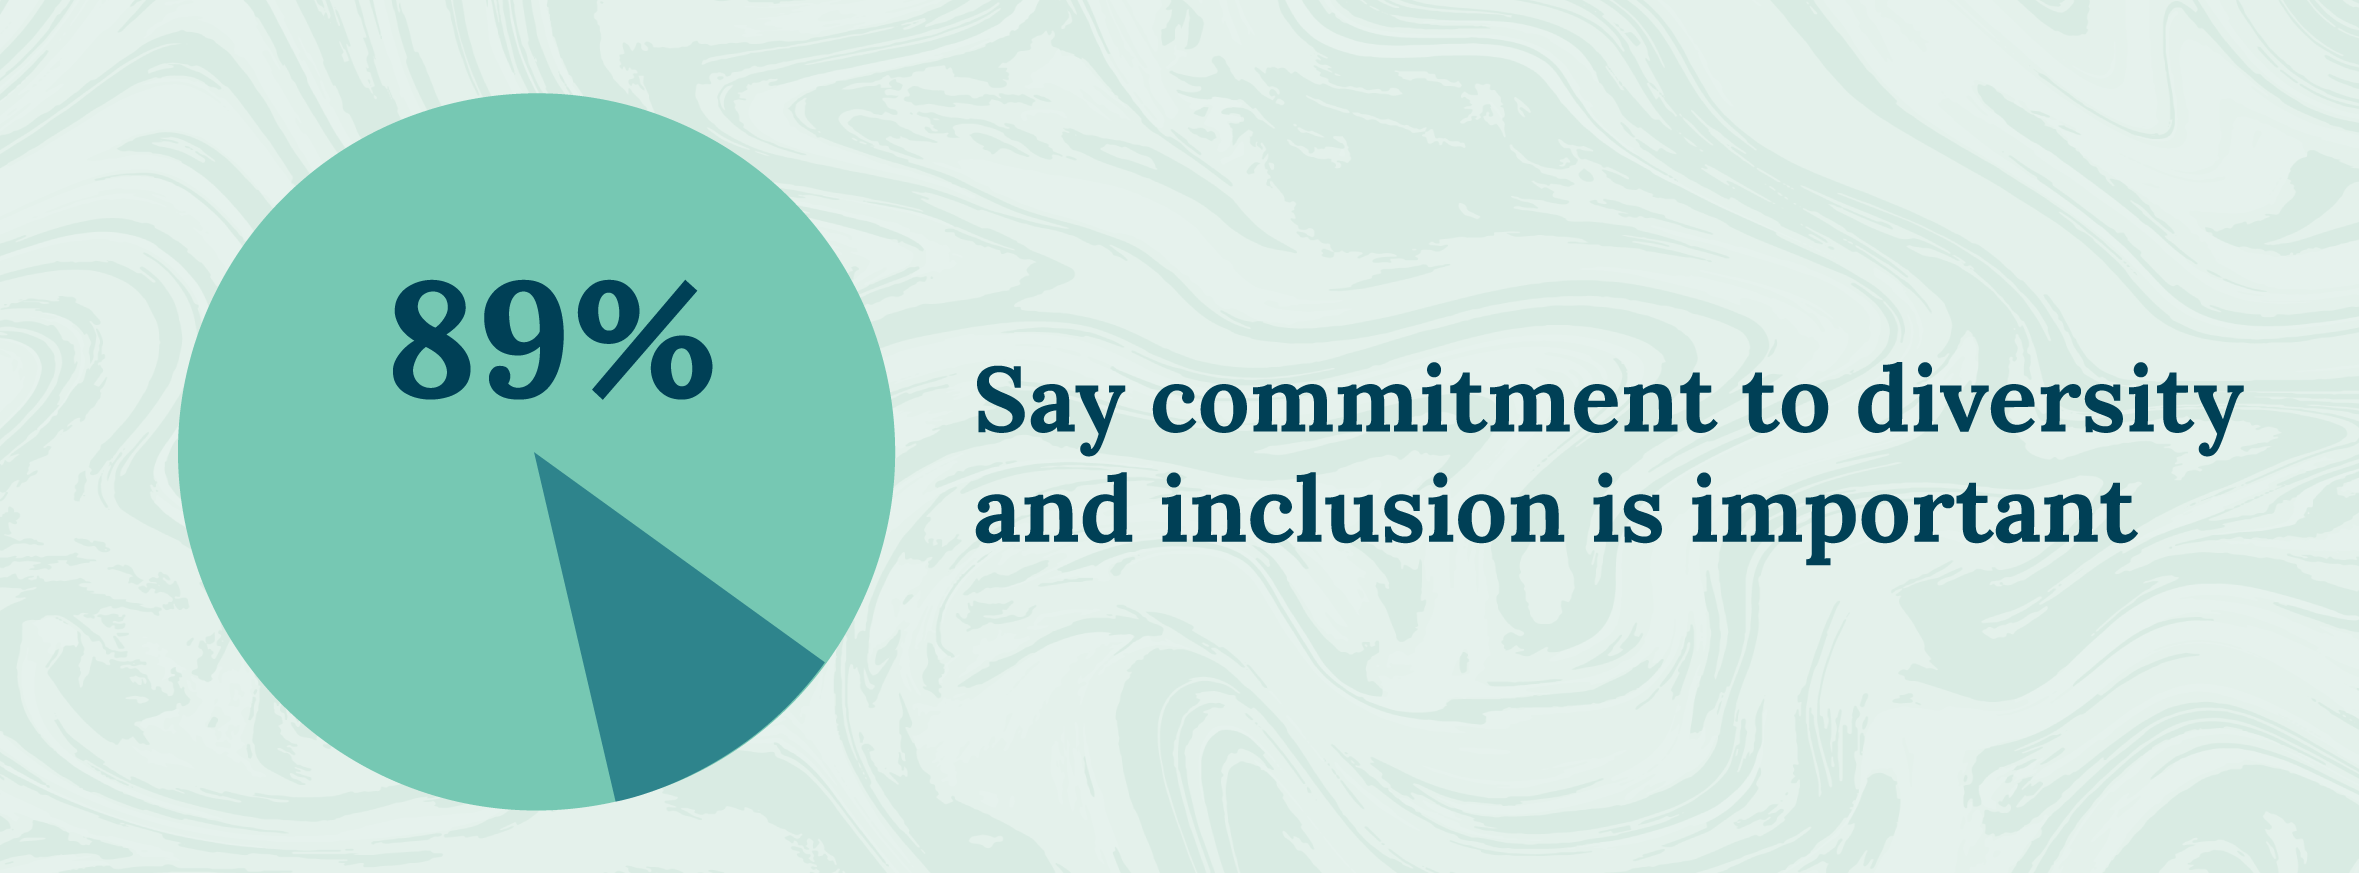 89% say a commitment to diversity and inclusions is important image